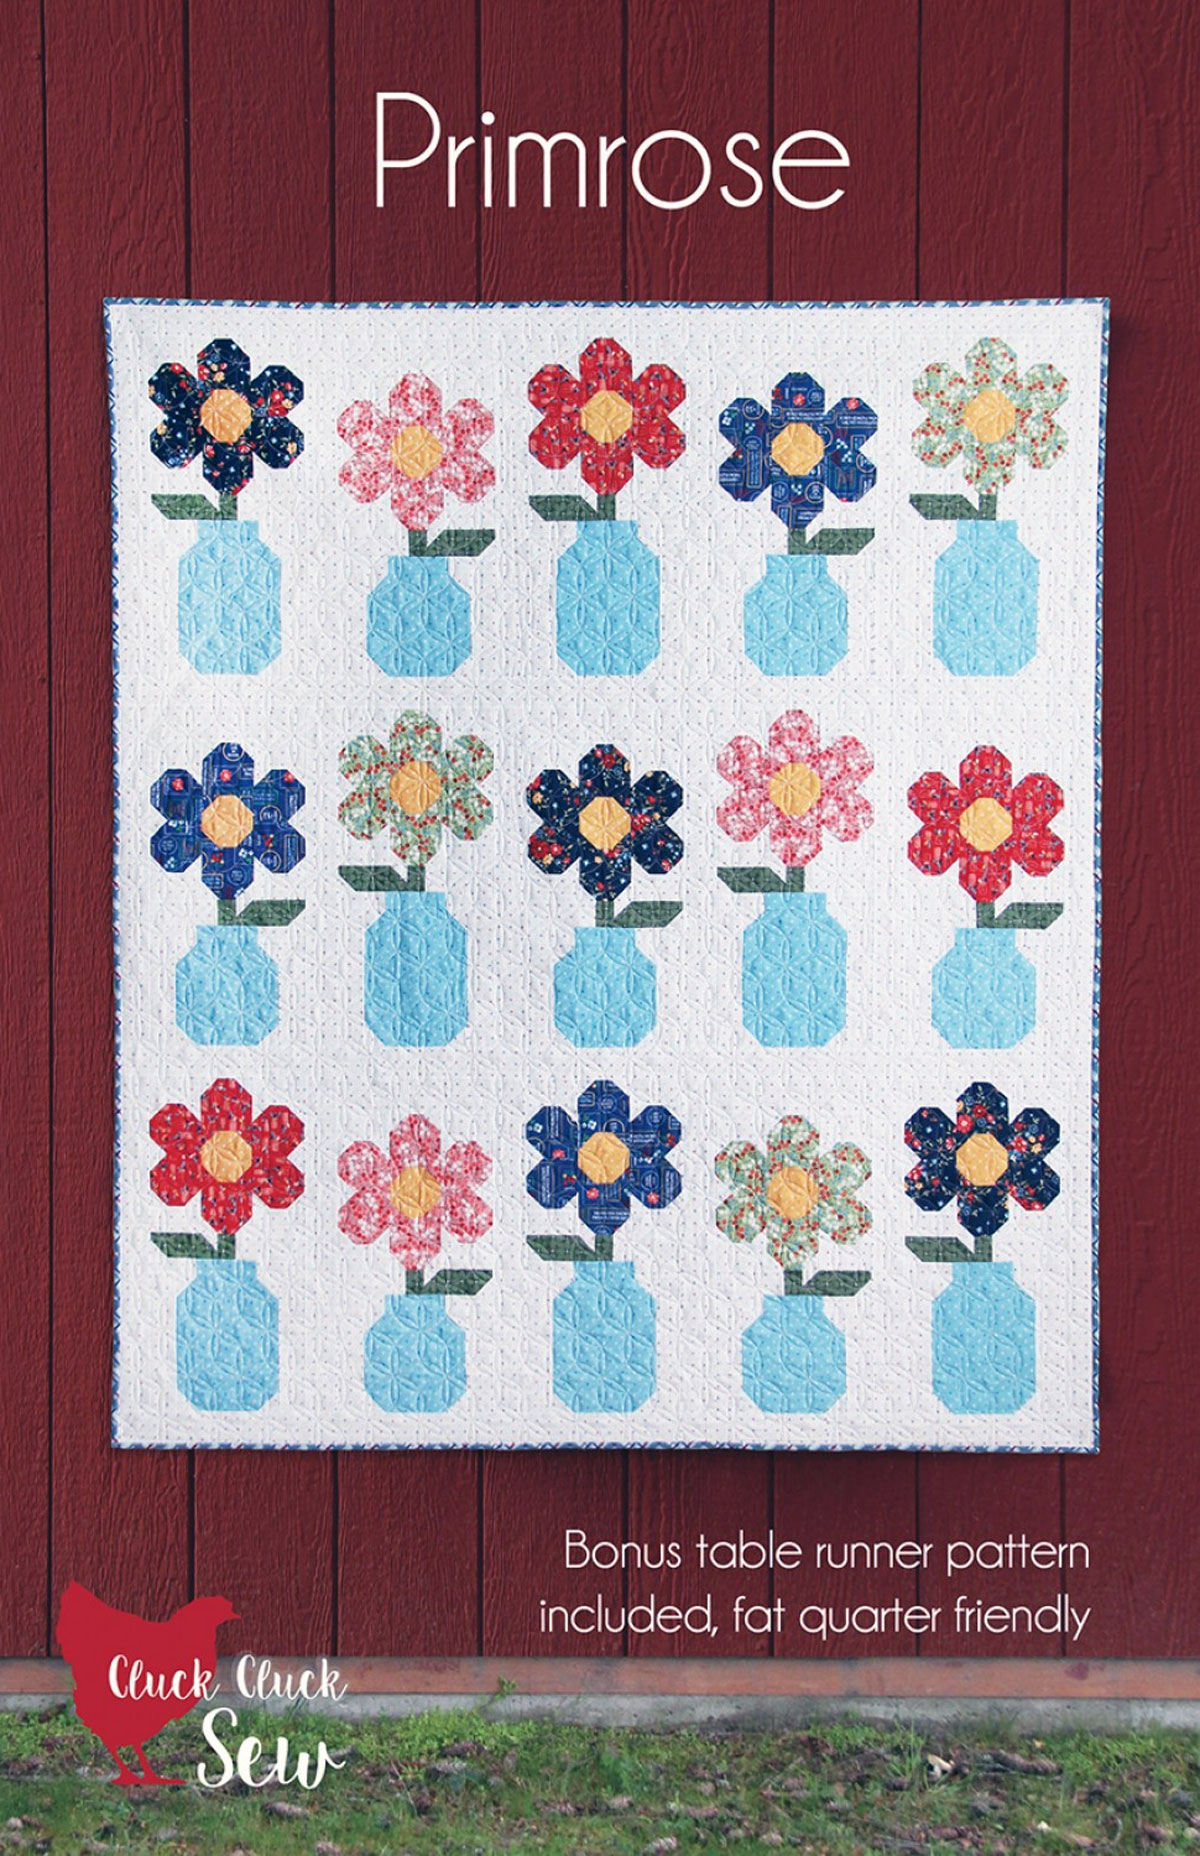 Primrose-quilt-sewing-pattern-Cluck-Cluck-Sew-front